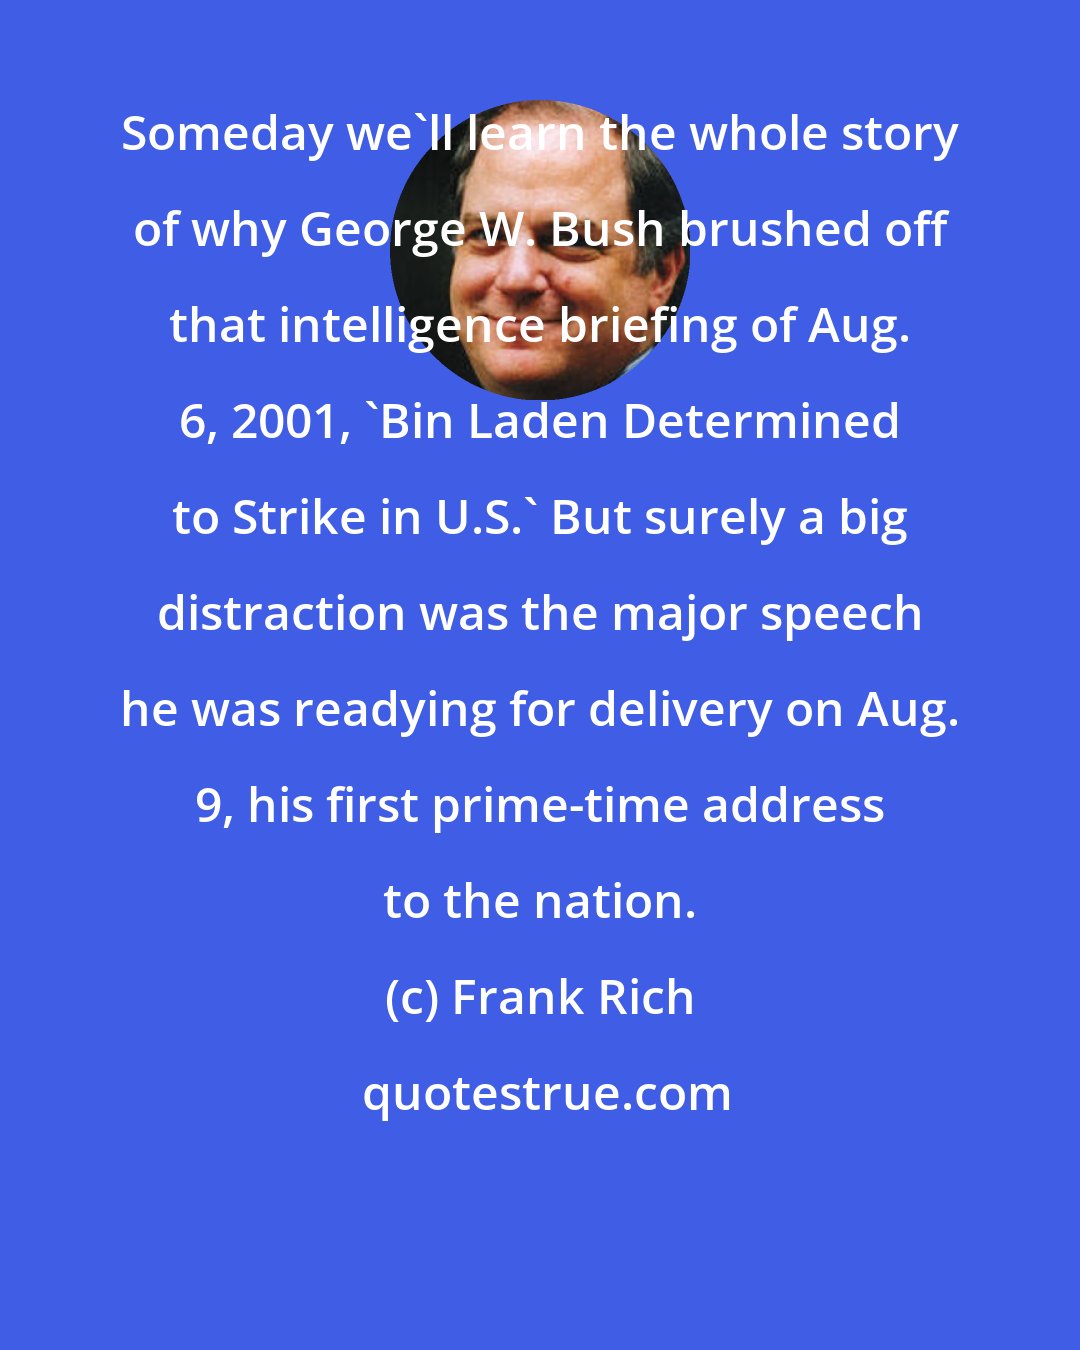 Frank Rich: Someday we'll learn the whole story of why George W. Bush brushed off that intelligence briefing of Aug. 6, 2001, 'Bin Laden Determined to Strike in U.S.' But surely a big distraction was the major speech he was readying for delivery on Aug. 9, his first prime-time address to the nation.